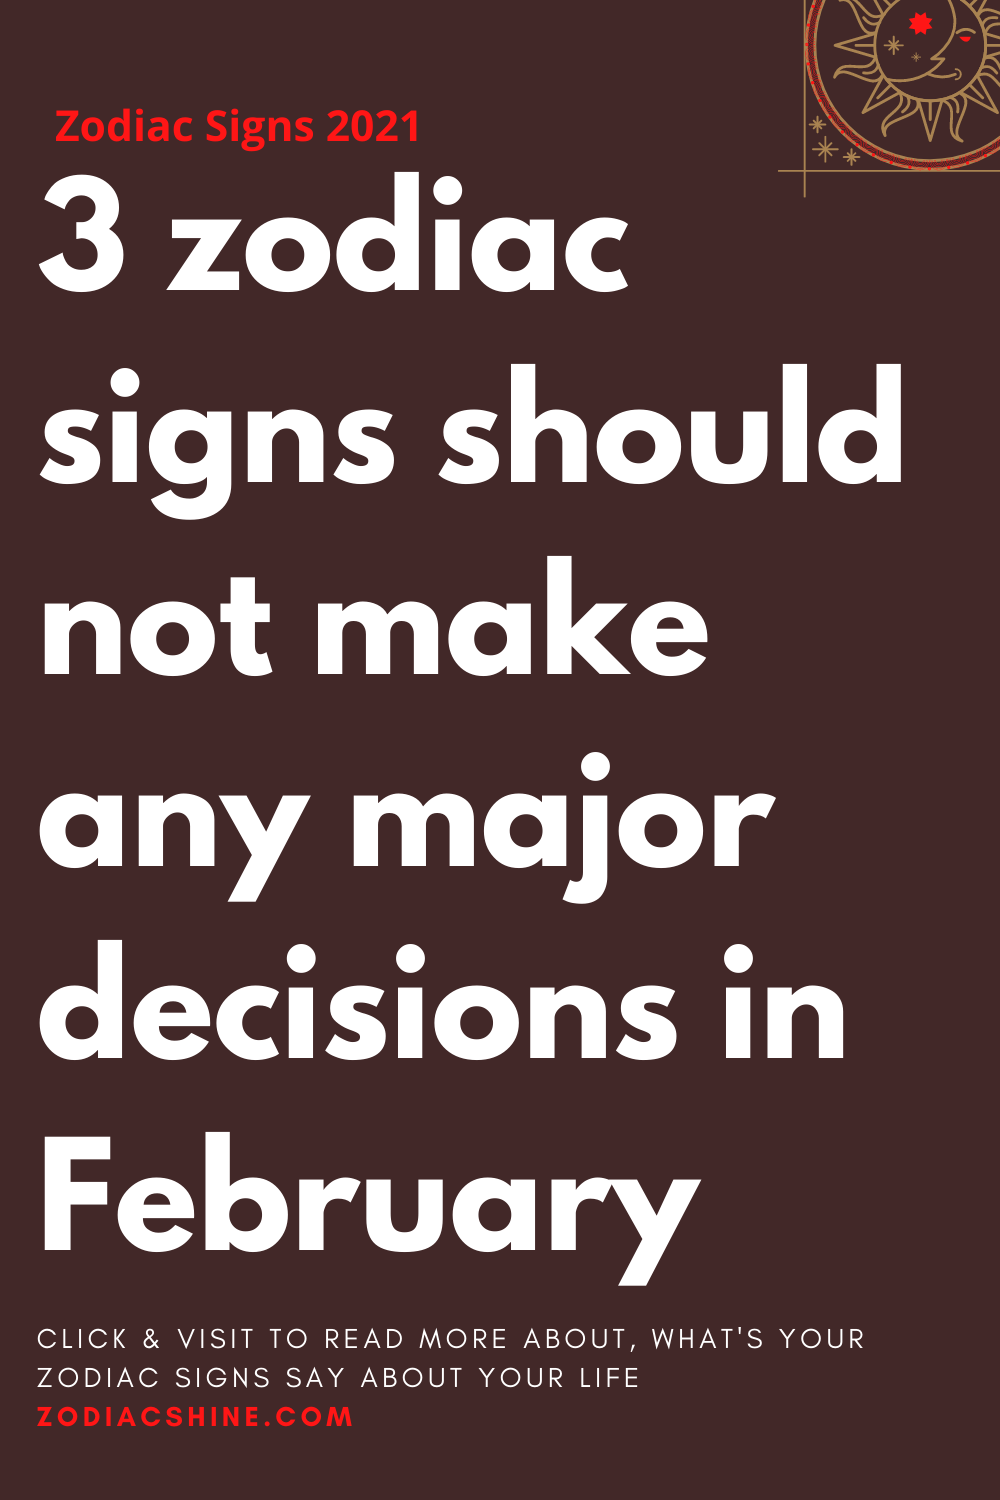 3 zodiac signs should not make any major decisions in February